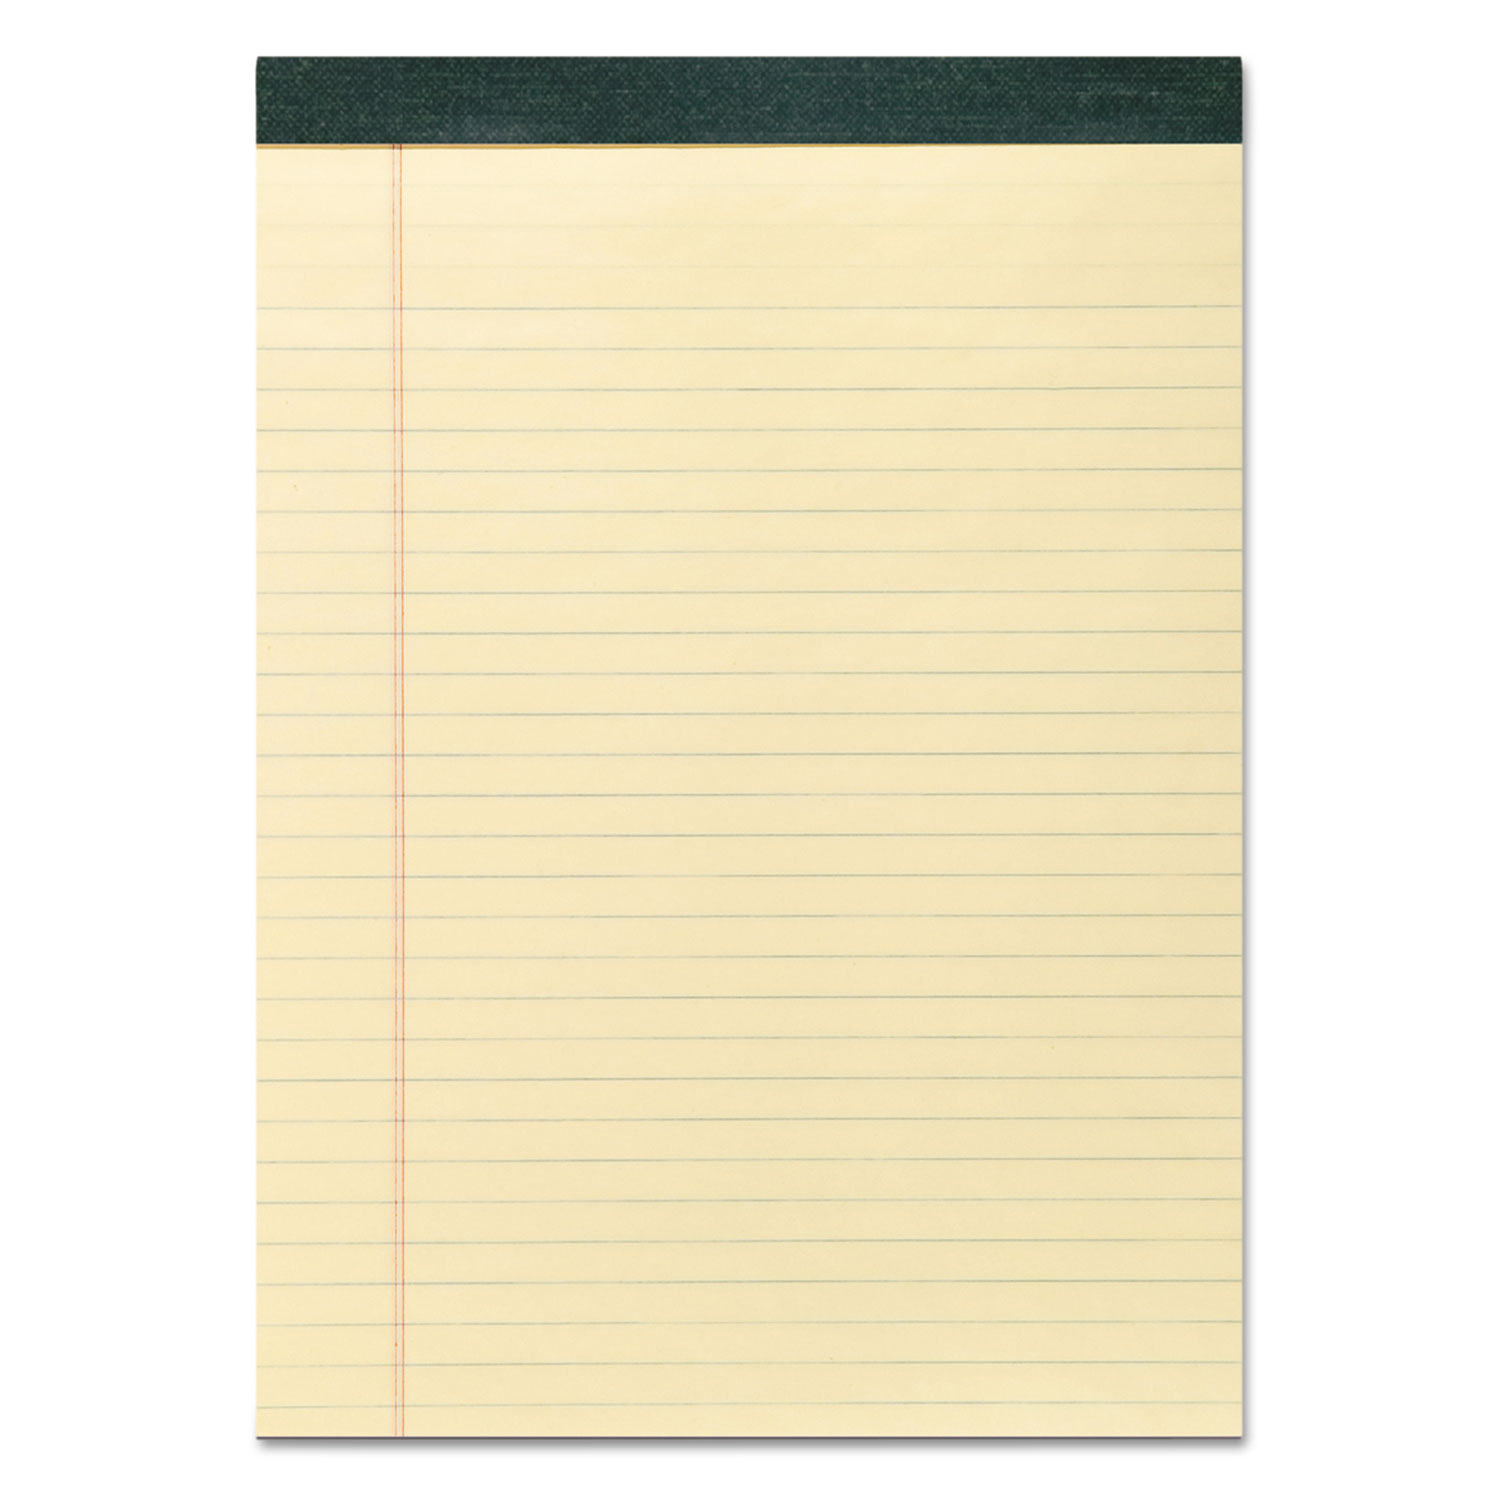  Roaring Spring 74712 Recycled Legal Pad, Wide/Legal Rule, 8.5 x 11, Canary, 40 Sheets, Dozen (ROA74712) 